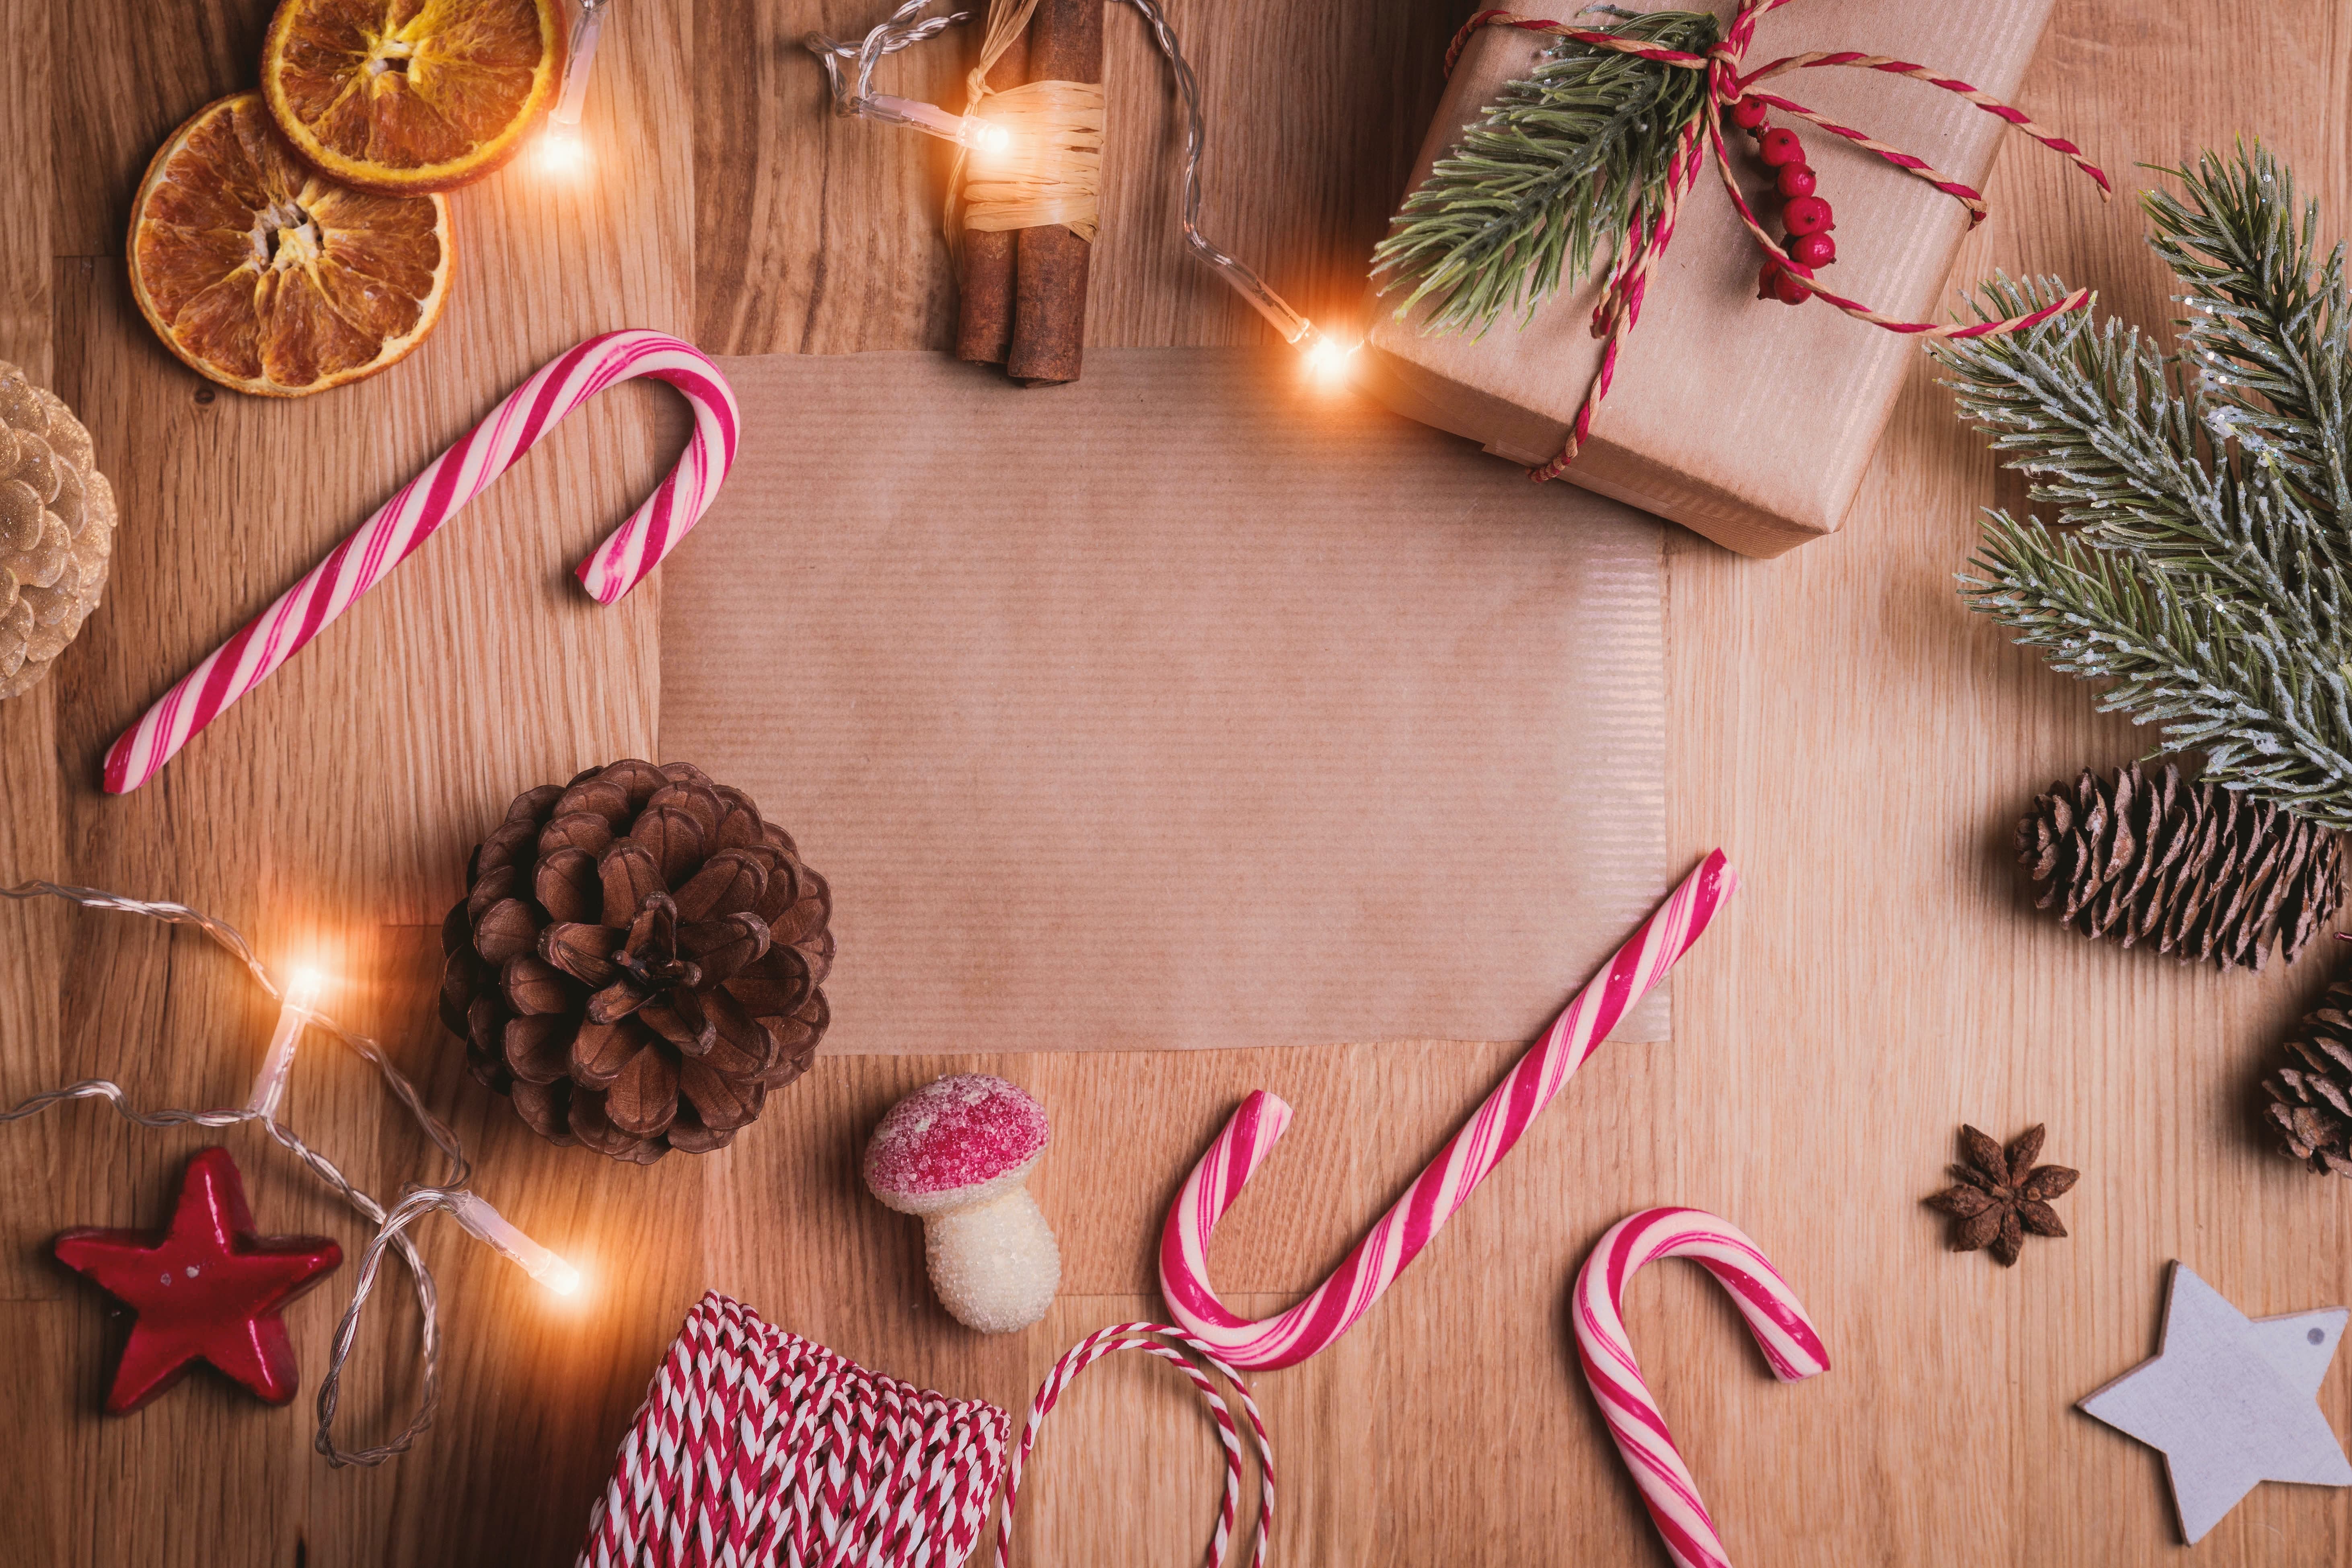 A Guide To Finding Sustainable Christmas Gifts